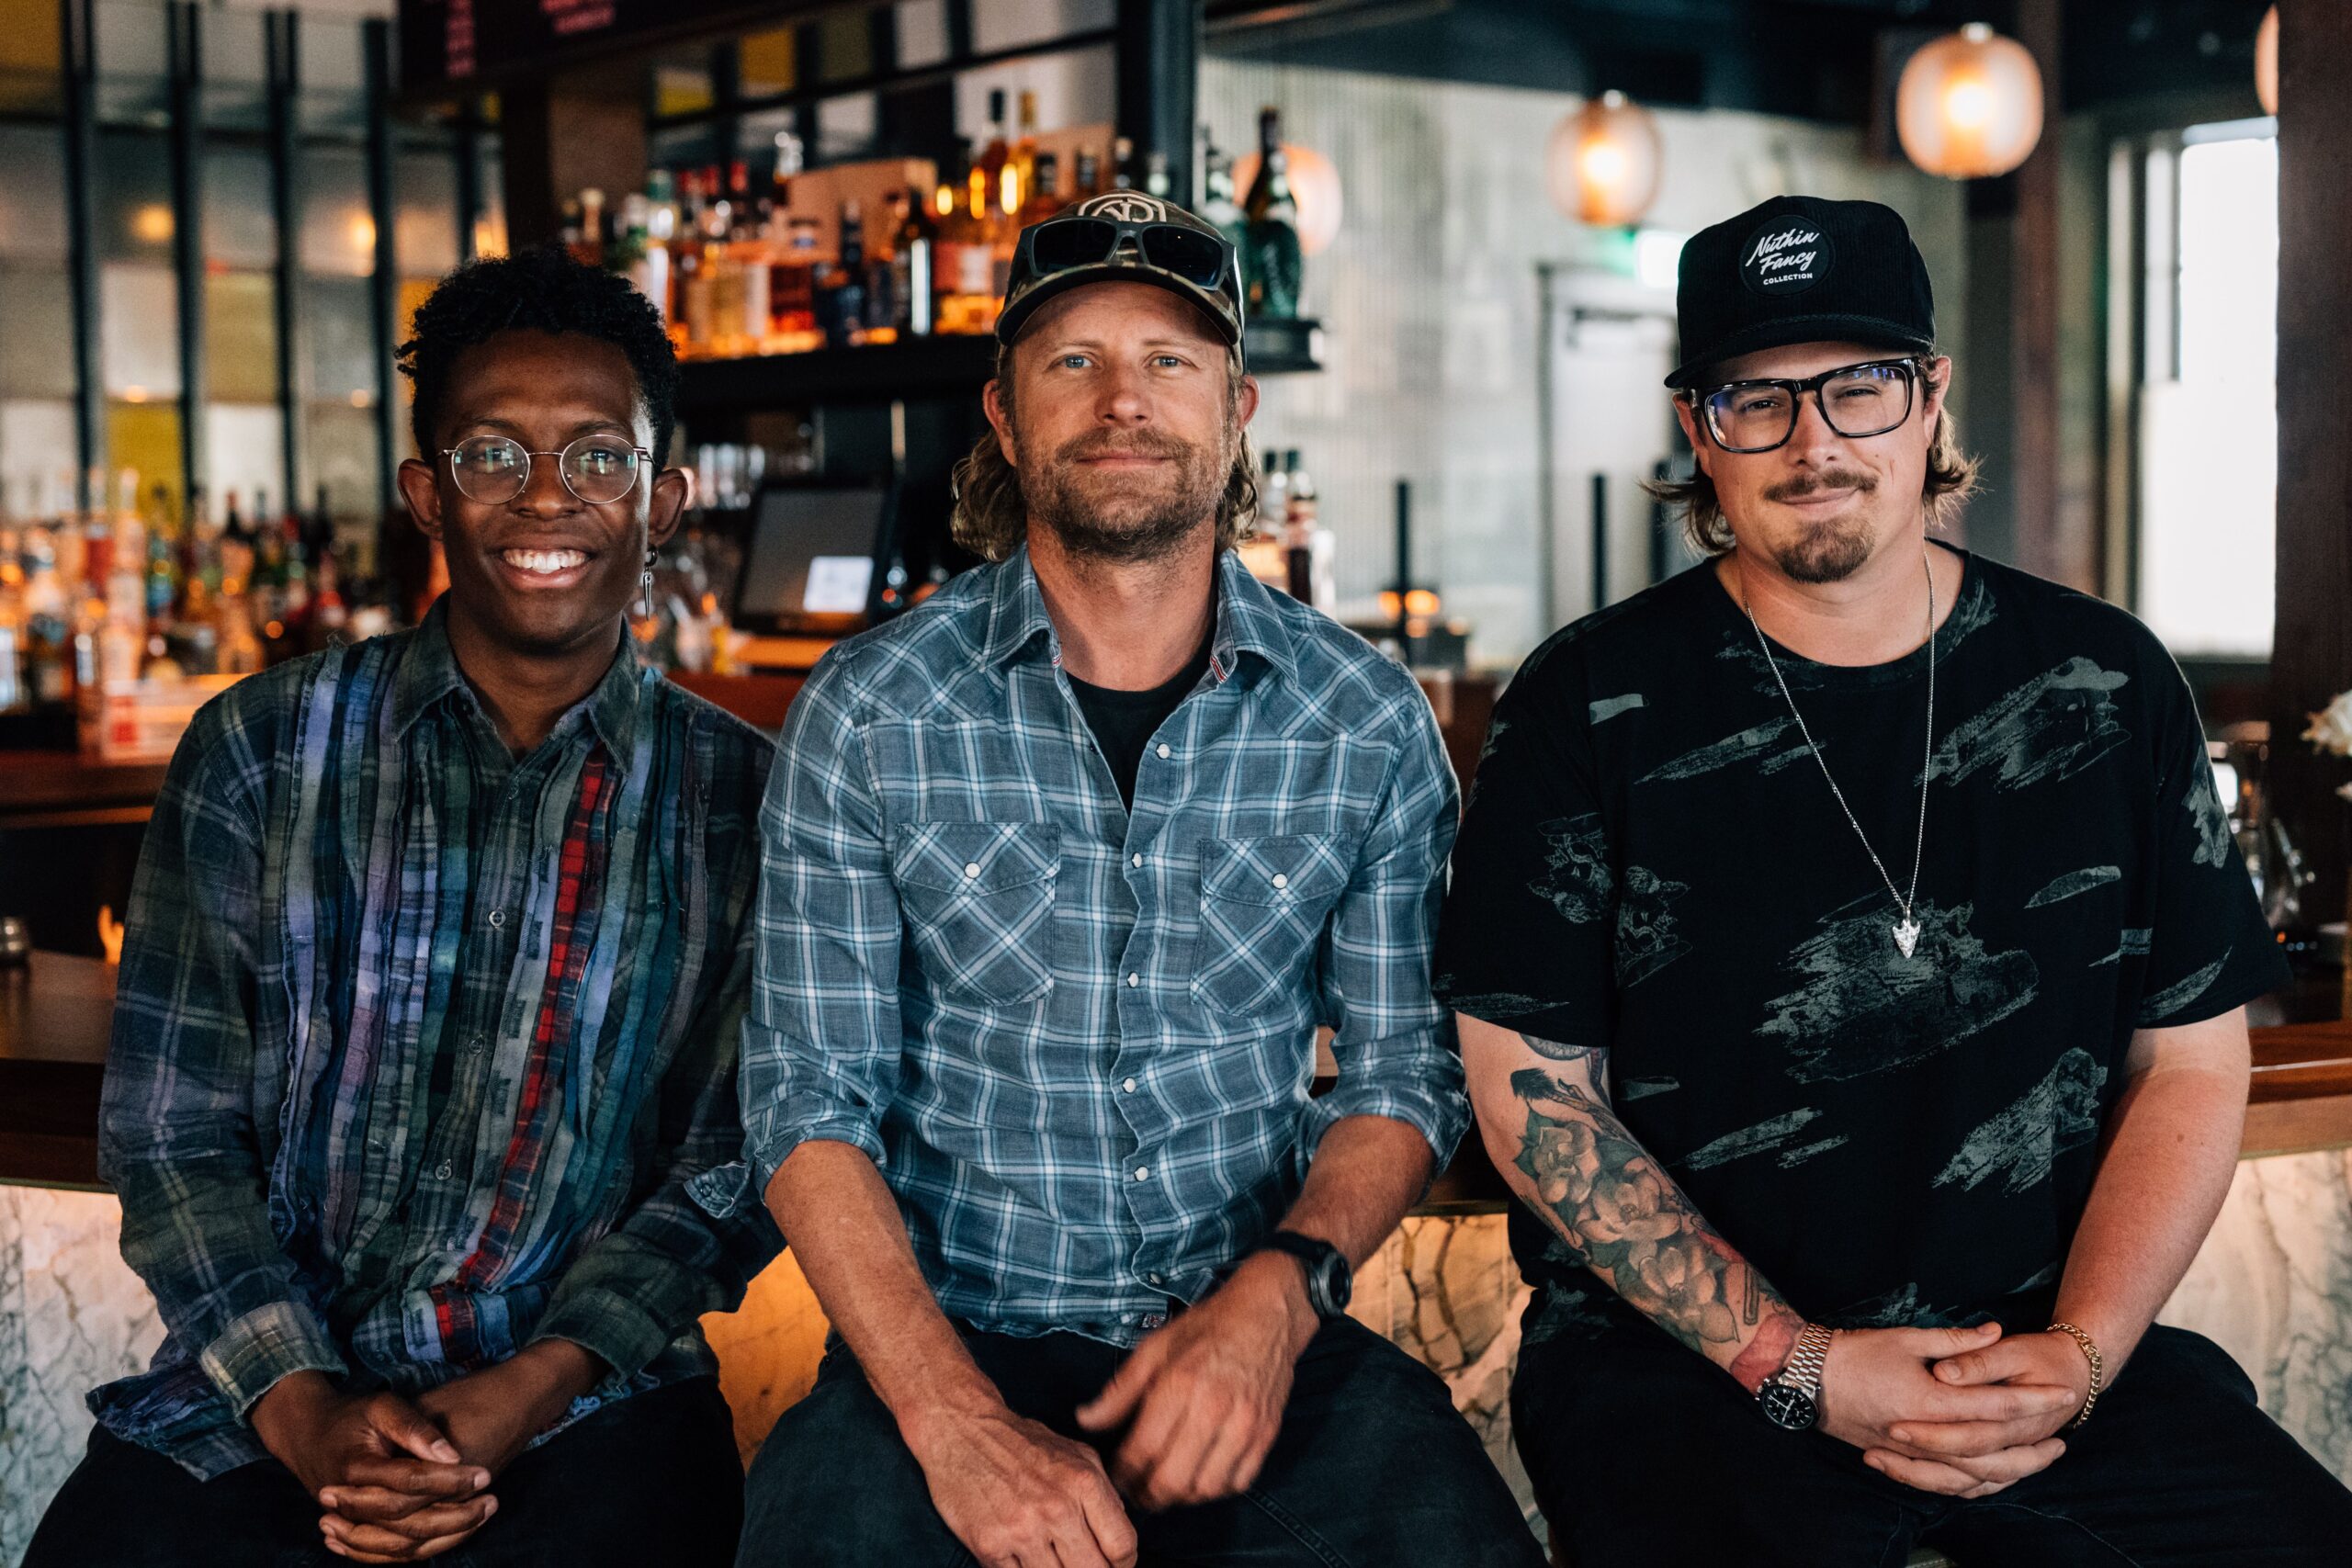 Dierks Bentley, BRELAND and HARDY Reflect on The Creative Process Behind Their No. 1 Hit “Beers On Me” (Exclusive)